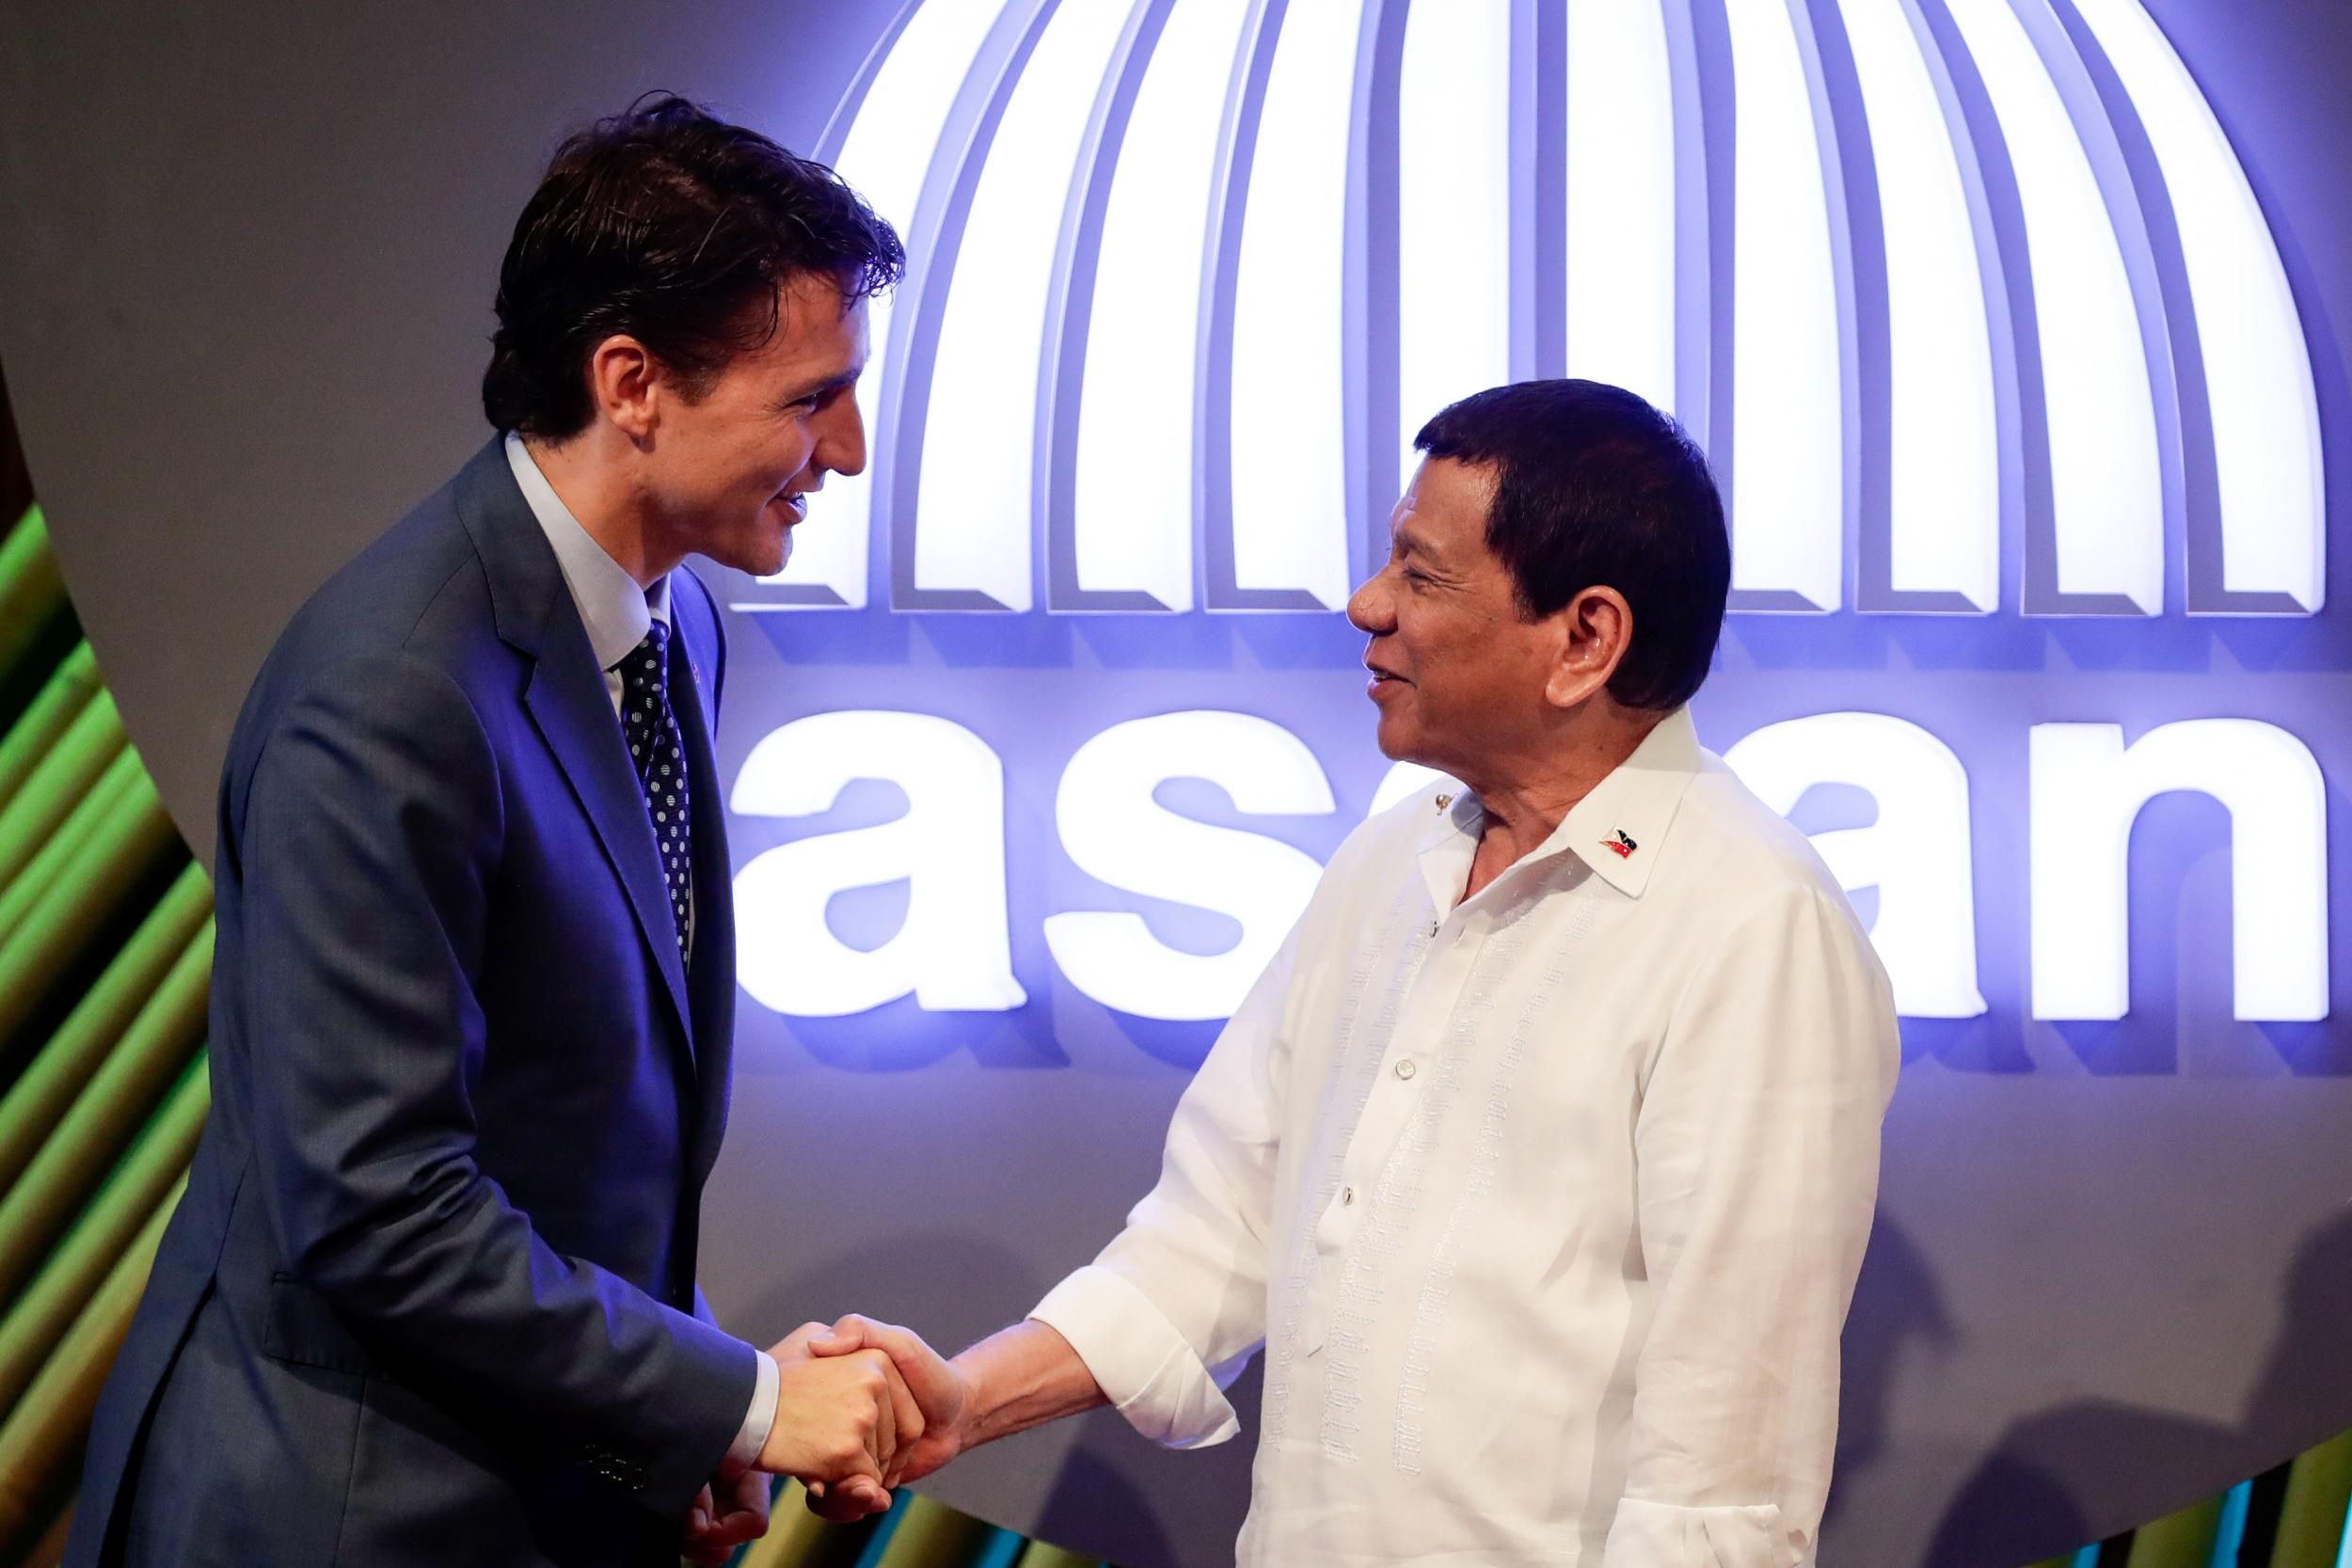 Canadian Prime Minister Justin Trudeau shakes hands with Philippine President Rodrigo Duterte before the opening ceremony of the 31st Association of Southeast Asian Nations (ASEAN) Summit in Manila